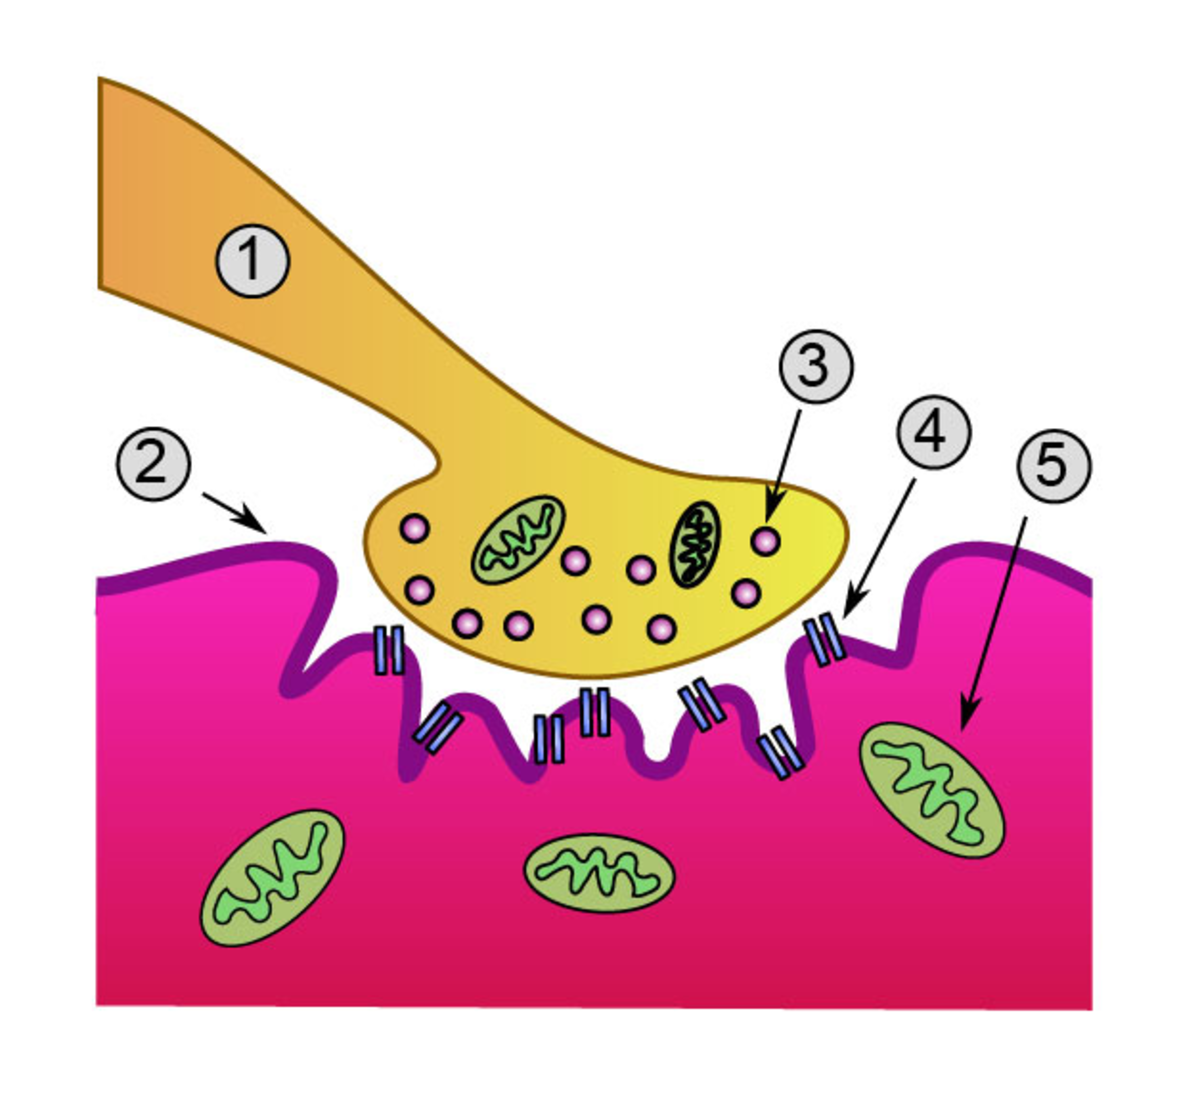 1- Axon of nerve 2- motor end plate on muscle fiber 3- Acetylcholine vesicle 4- Acetylcholine receptor on muscle fiber 5- mitochondrion